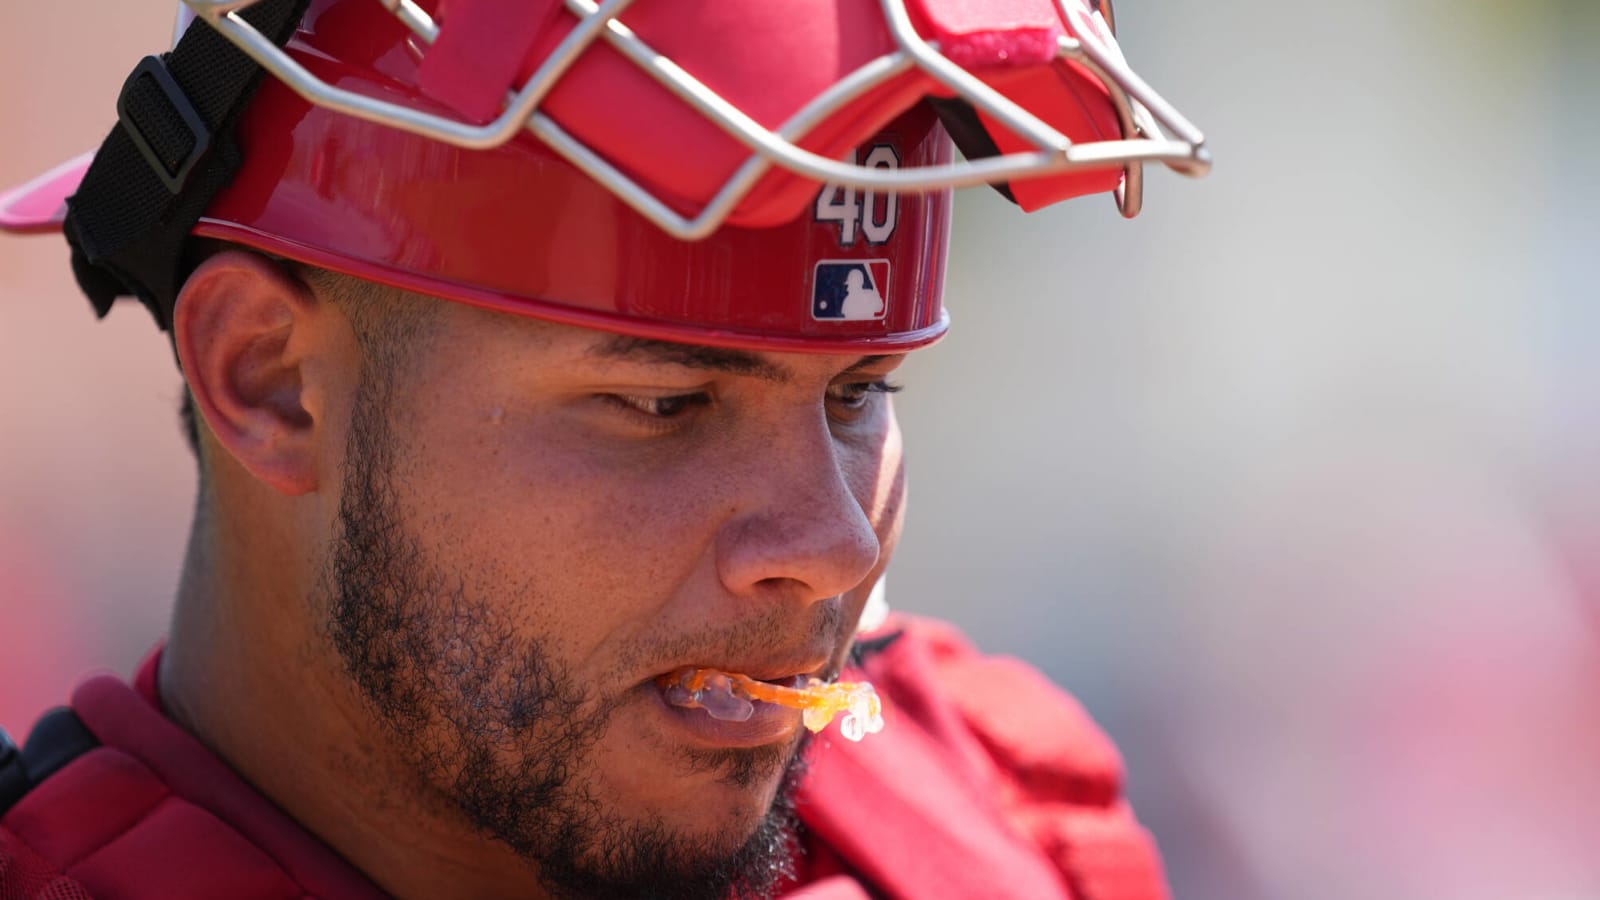 Cardinals catcher will wear special cleats to honor Yadier Molina